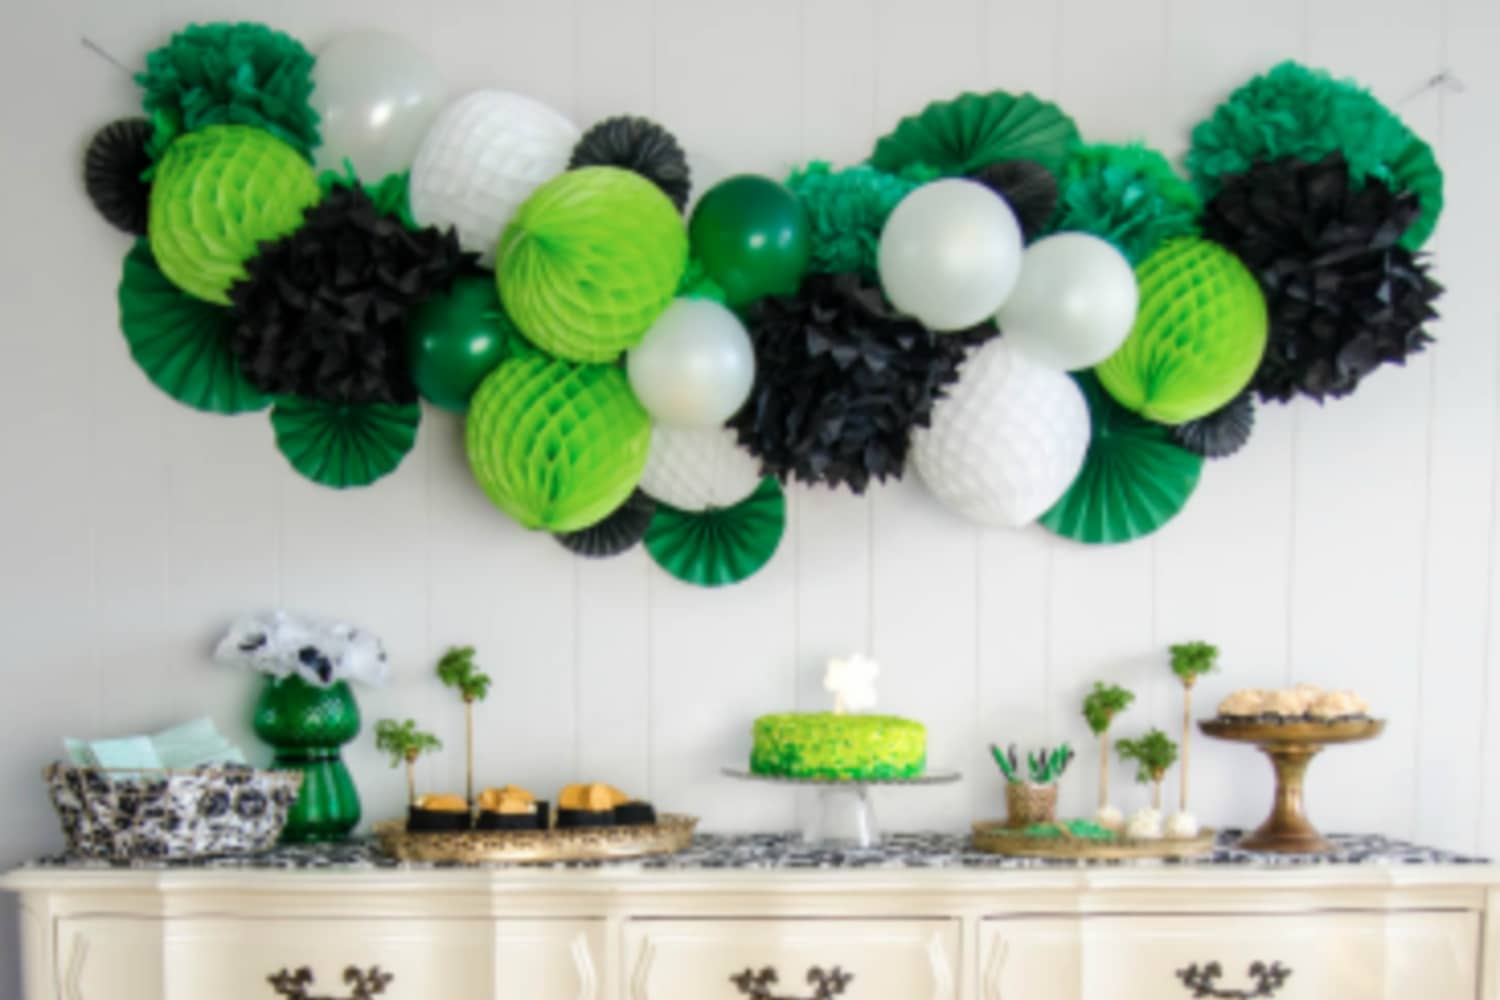 5 gorgeously green accessories for St. Patrick's Day and beyond